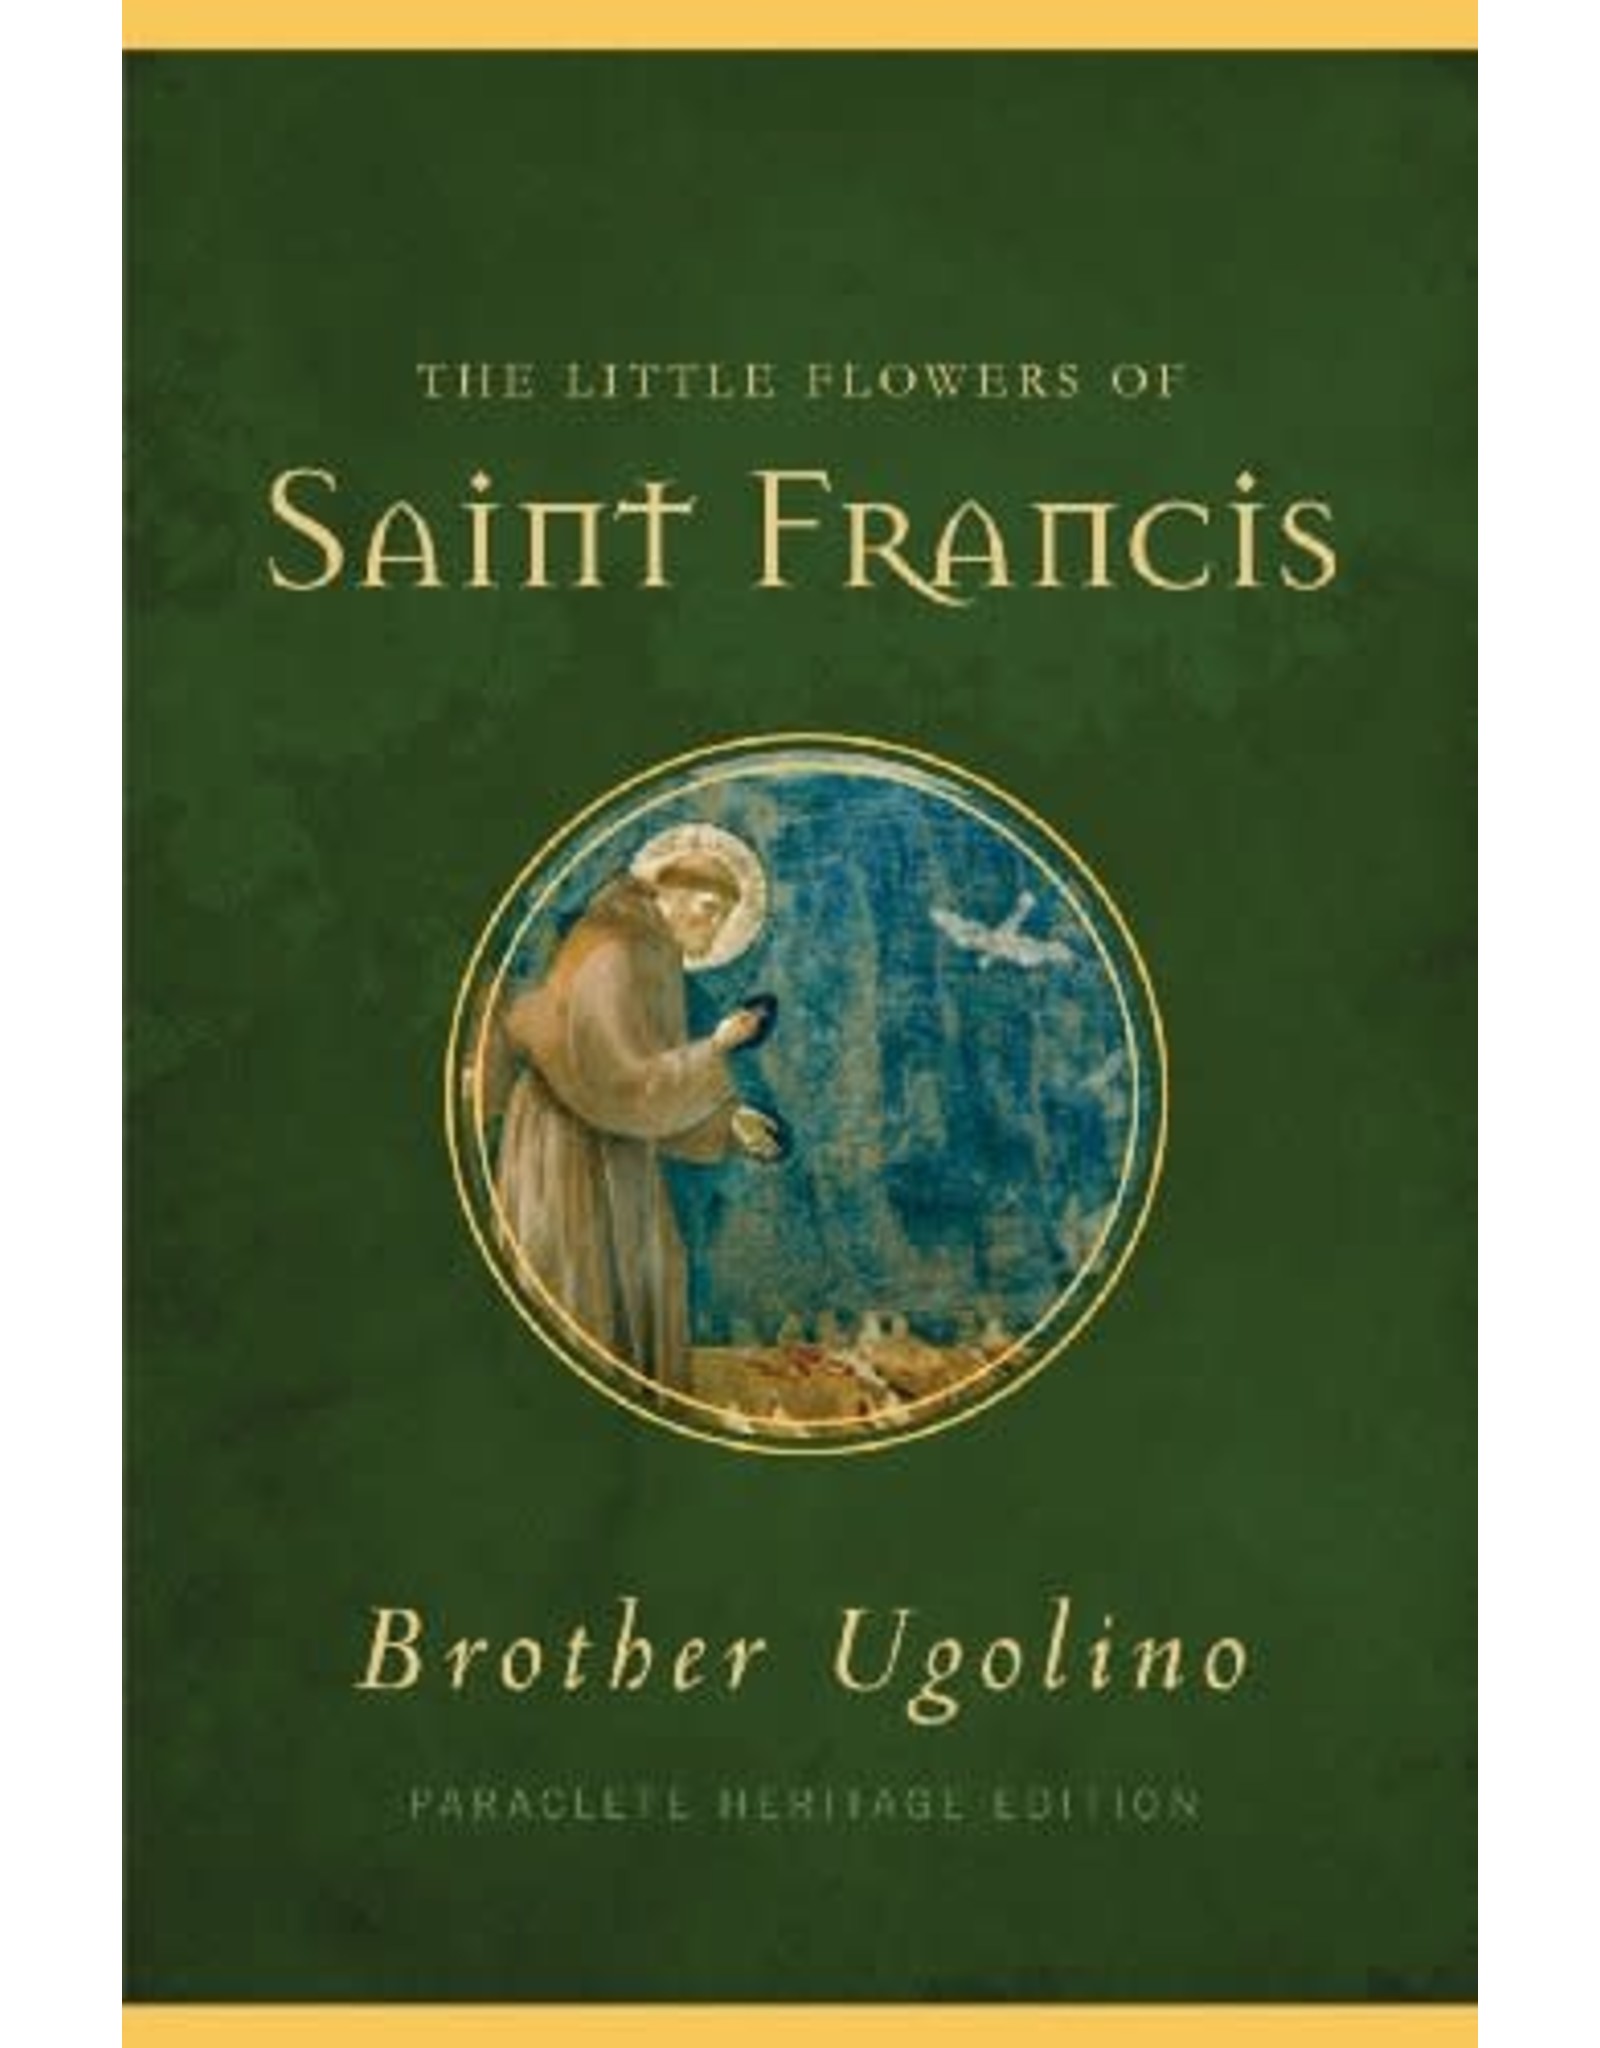 Paraclete Press The Little Flowers of Saint Francis by Brother Ugolino (Paraclete Heritage Edition, Paperback)